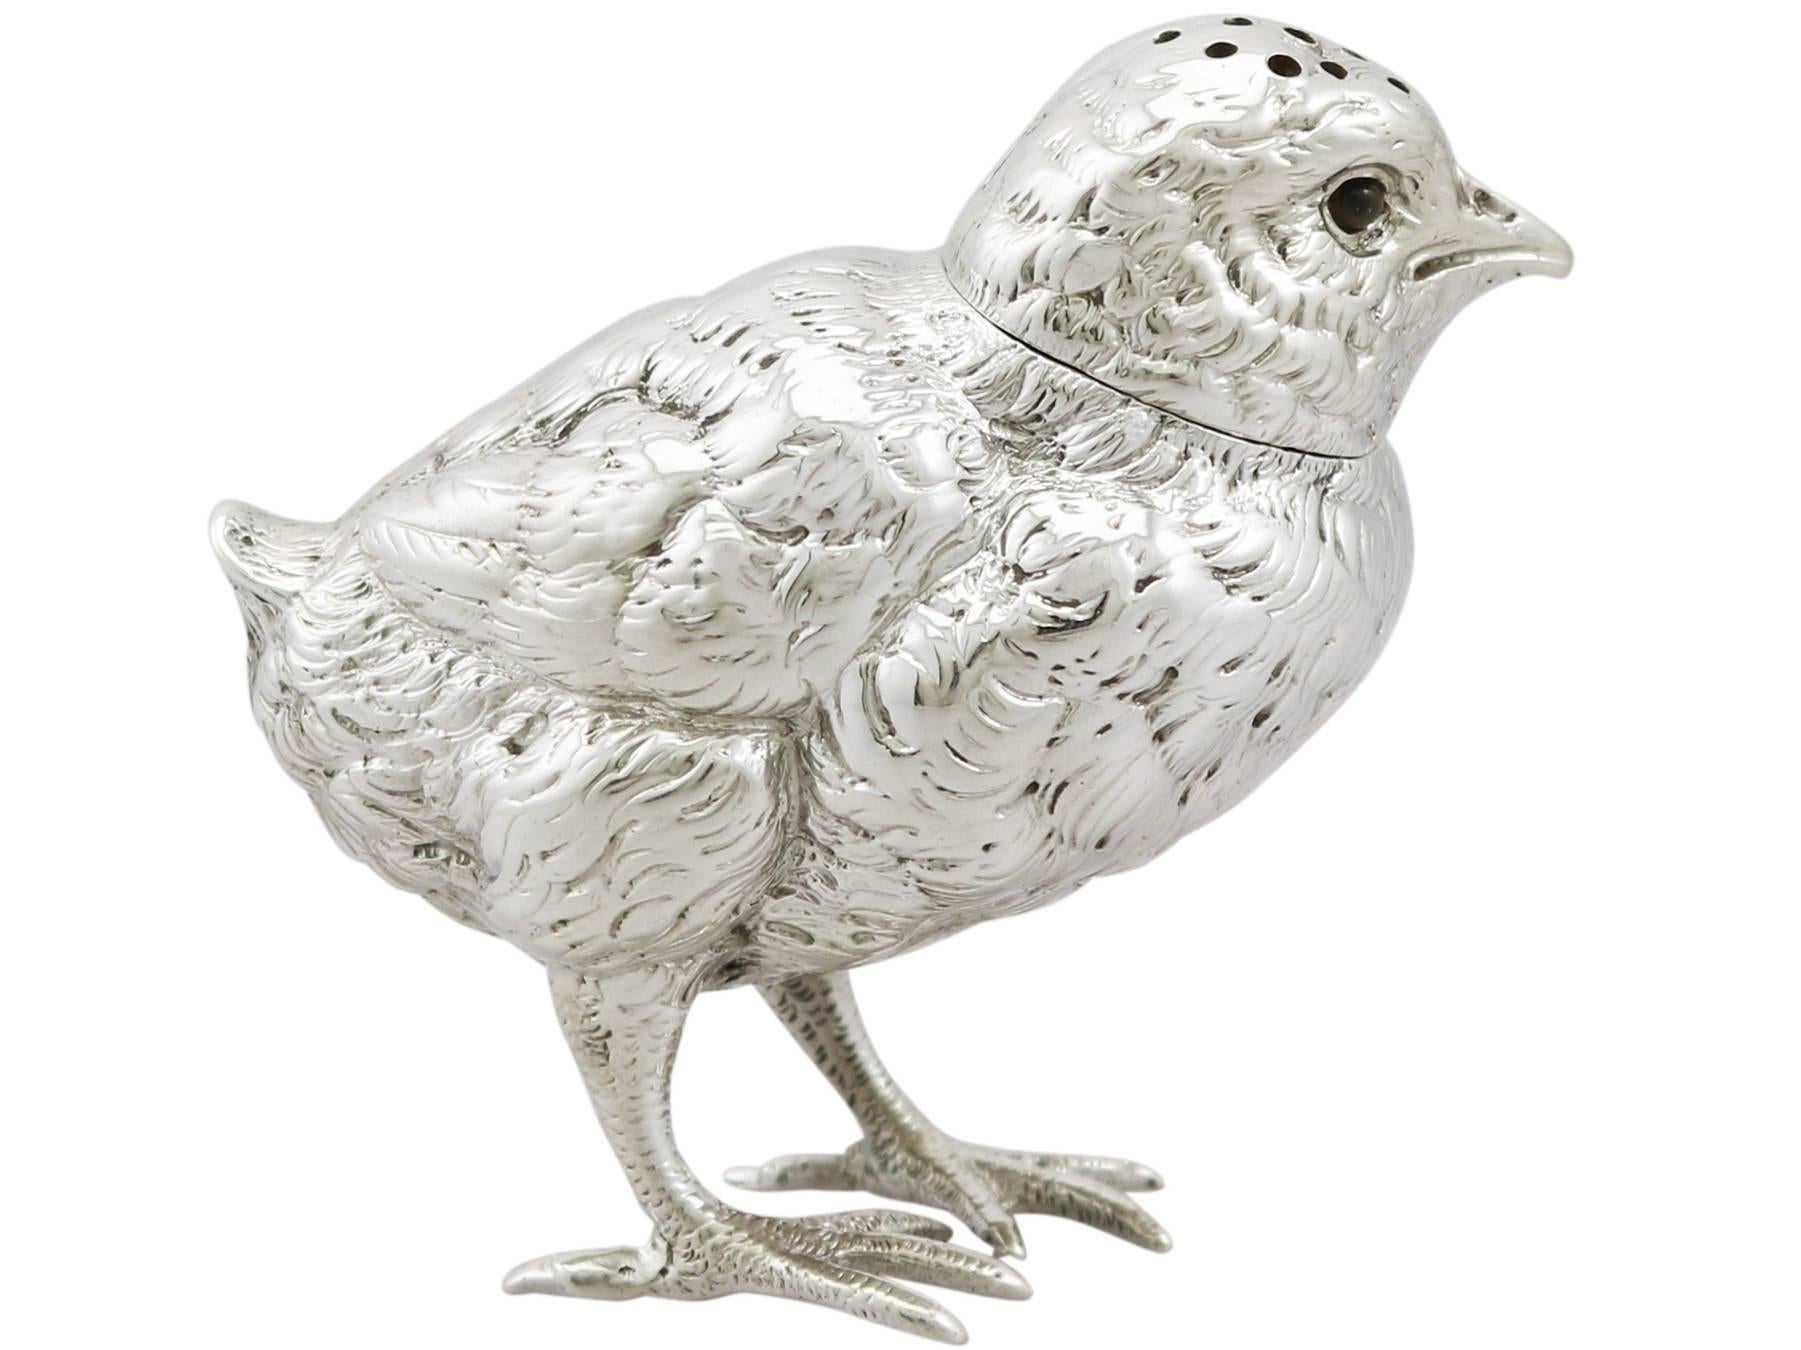 An exceptional, fine and impressive, large antique Victorian English sterling silver pepperette modeled in the form of a bird / chick; an addition to our animal related silverware collection

This exceptional antique Victorian cast sterling silver